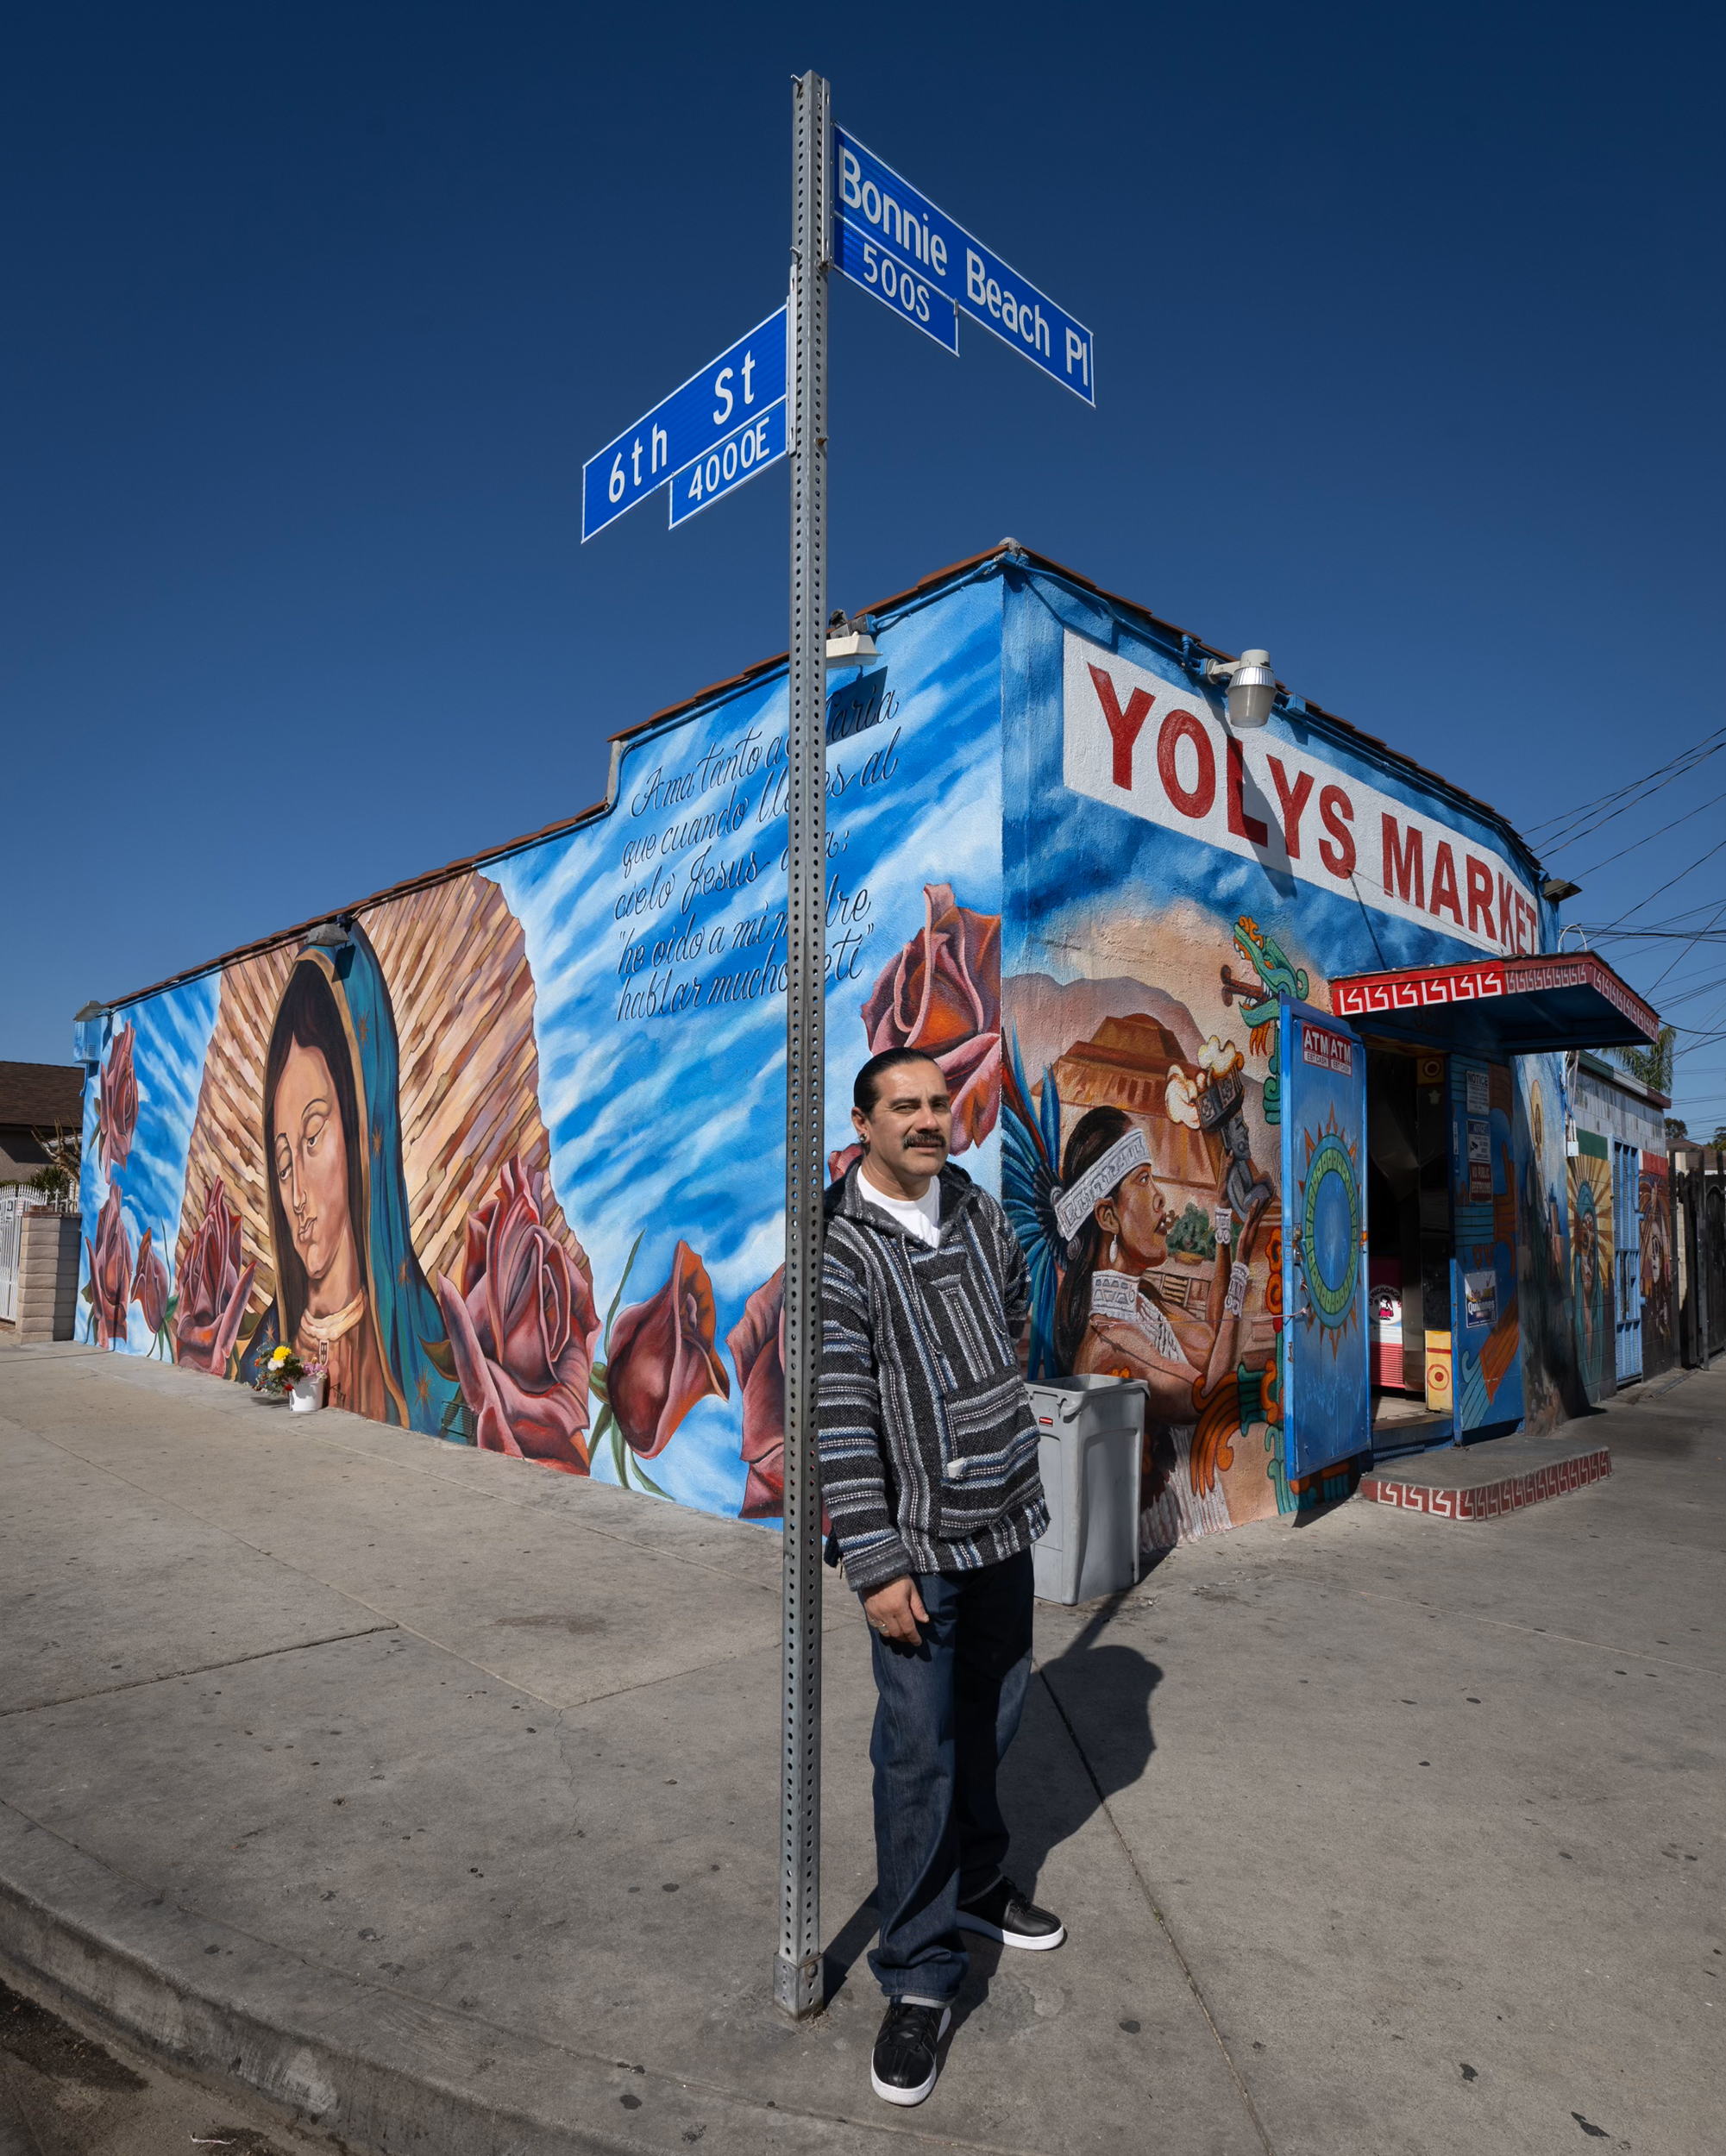 A Latino man wearing a black and gray-striped sweater stands at a street post at the corner of 6th St. and Bonnie Beach Place. Behind him, a colorful mural of the Virgin of Guadalupe and an Aztec person wrap around the walls of a building labeled “Yolys Market.”